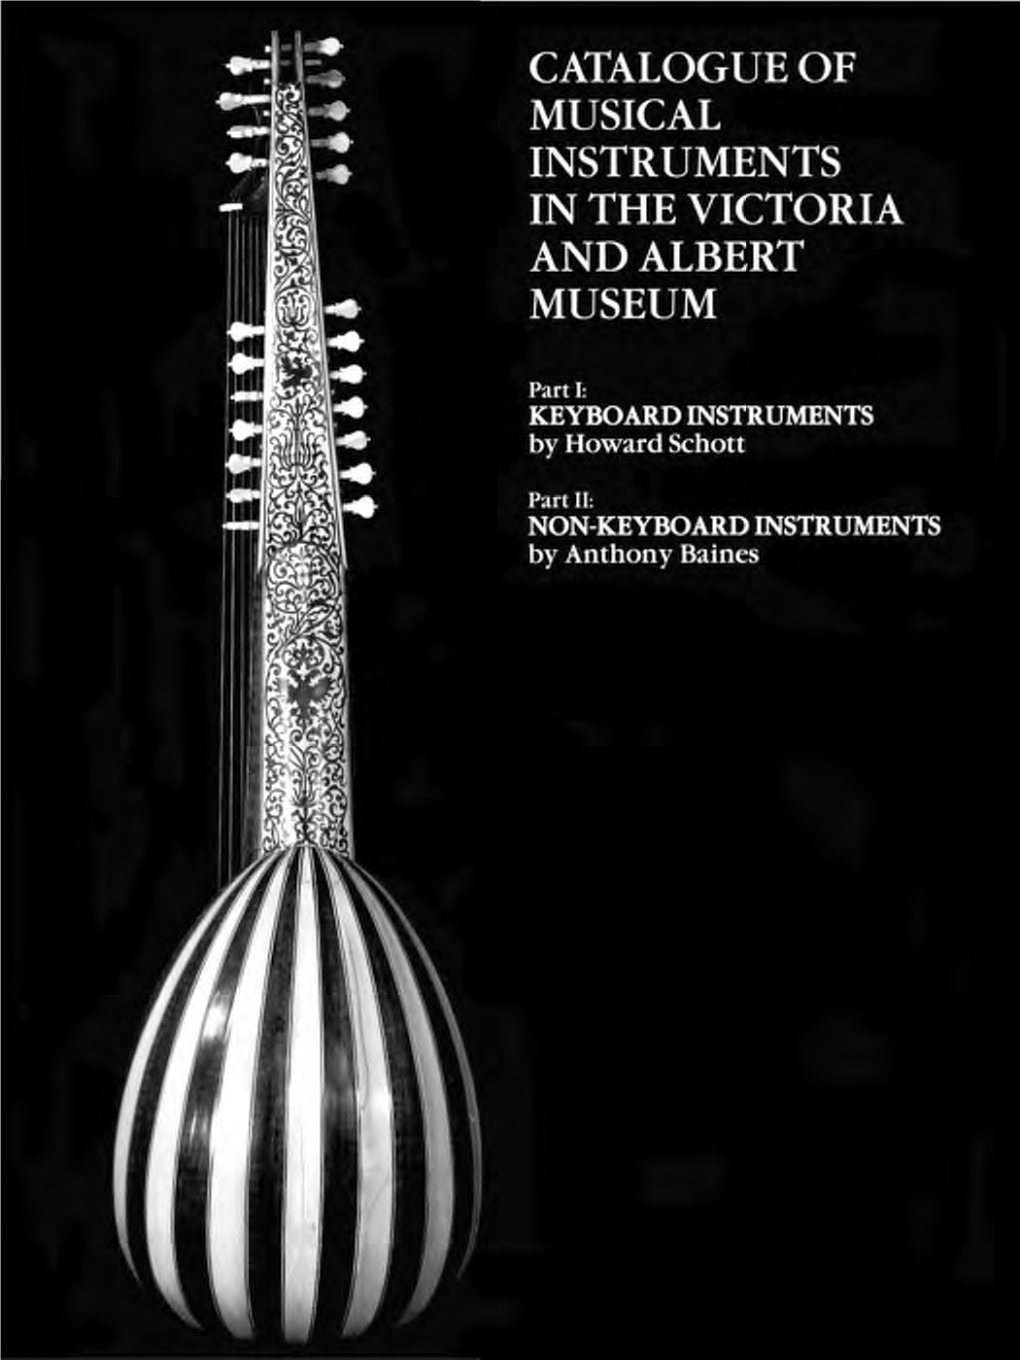 Catalogue of Musical Instruments in the Victoria and Albert Museum